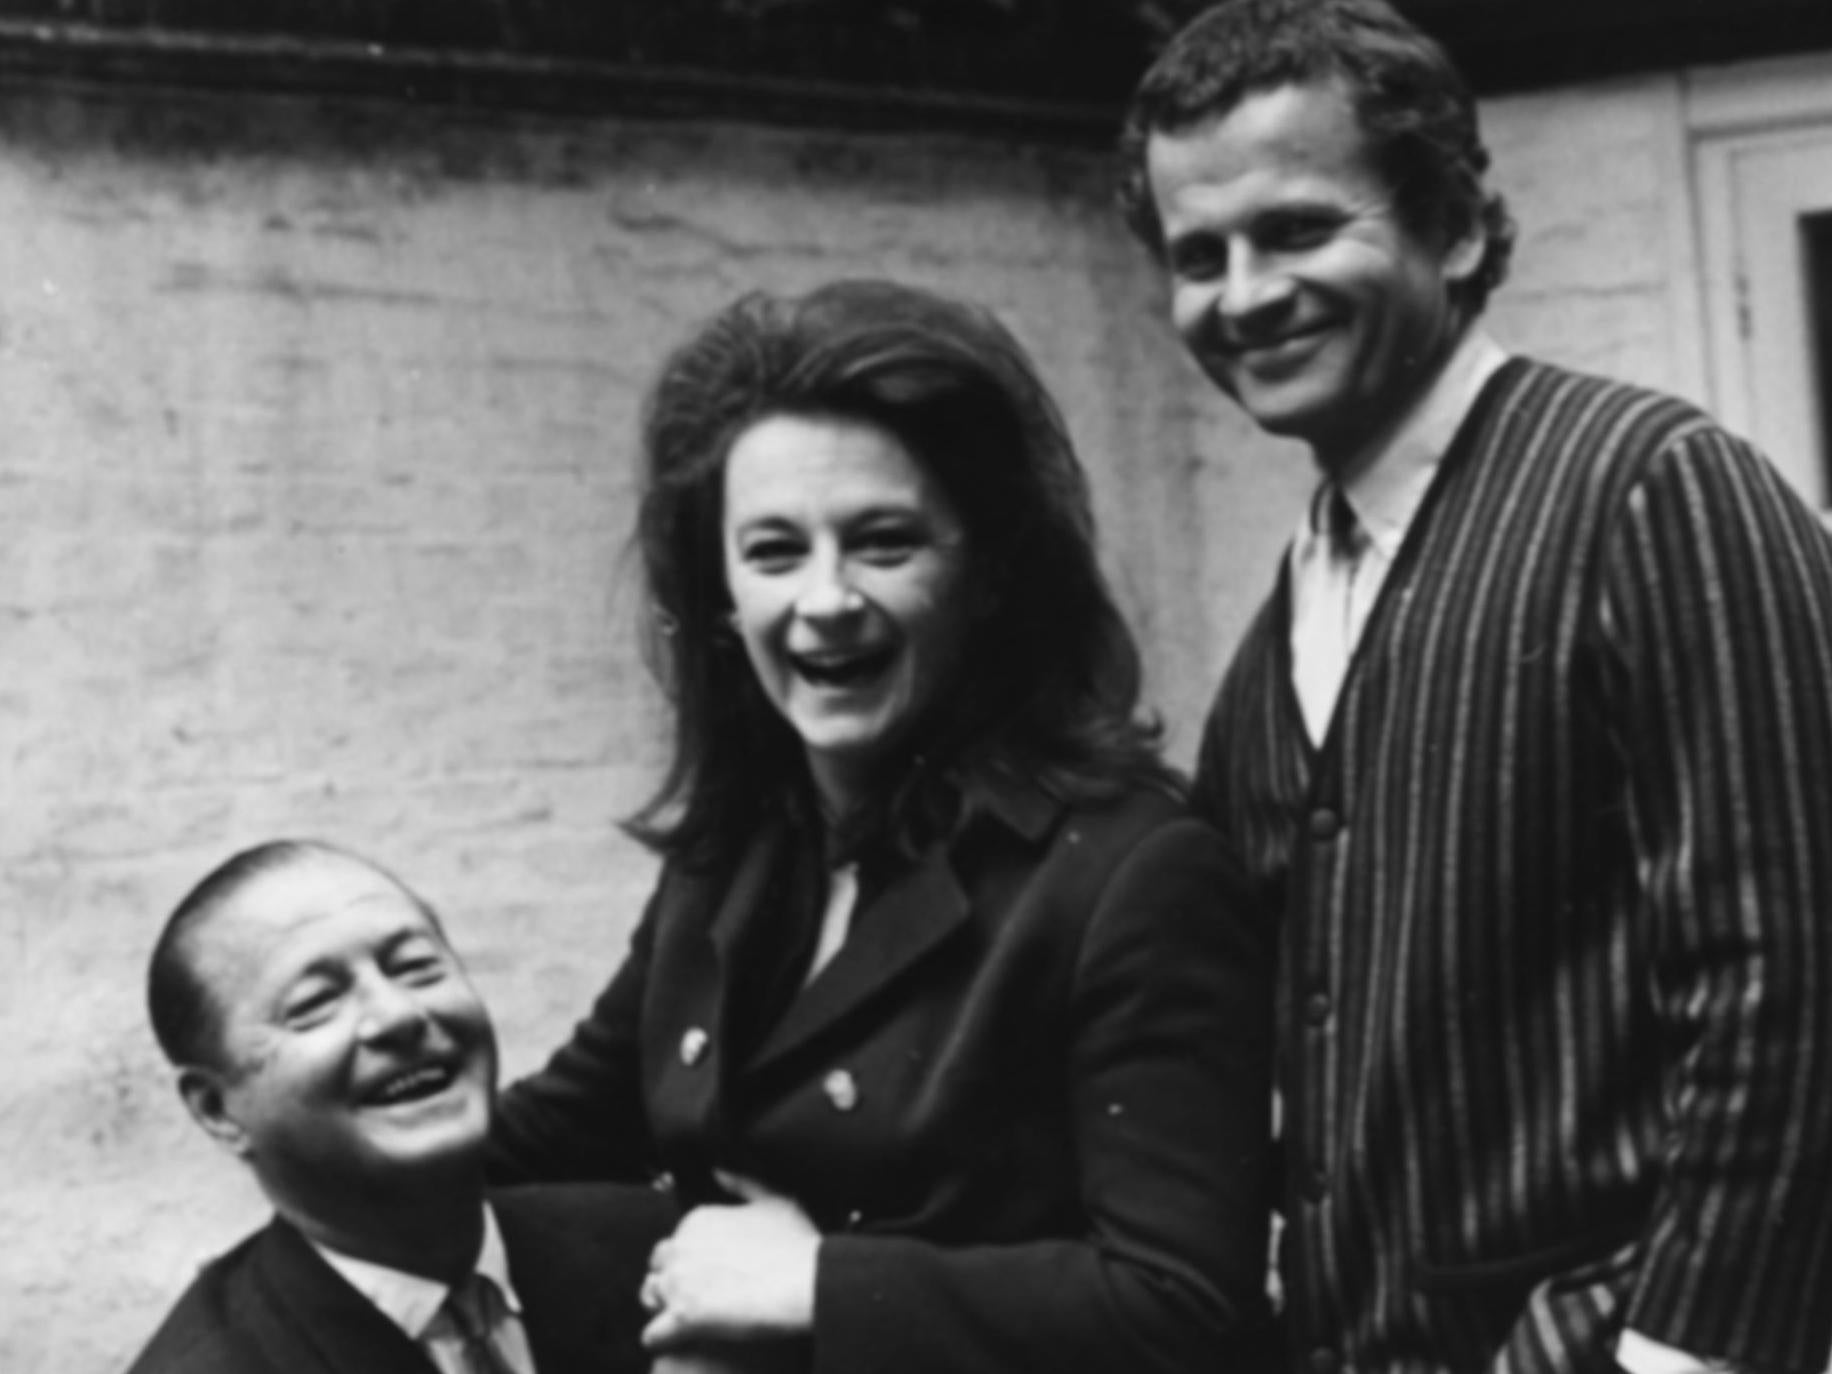 Caldwell with playwright Terence Rattigan (left) and actor an Holm, at a photocall for the 1970 play 'A Bequest to the Nation'